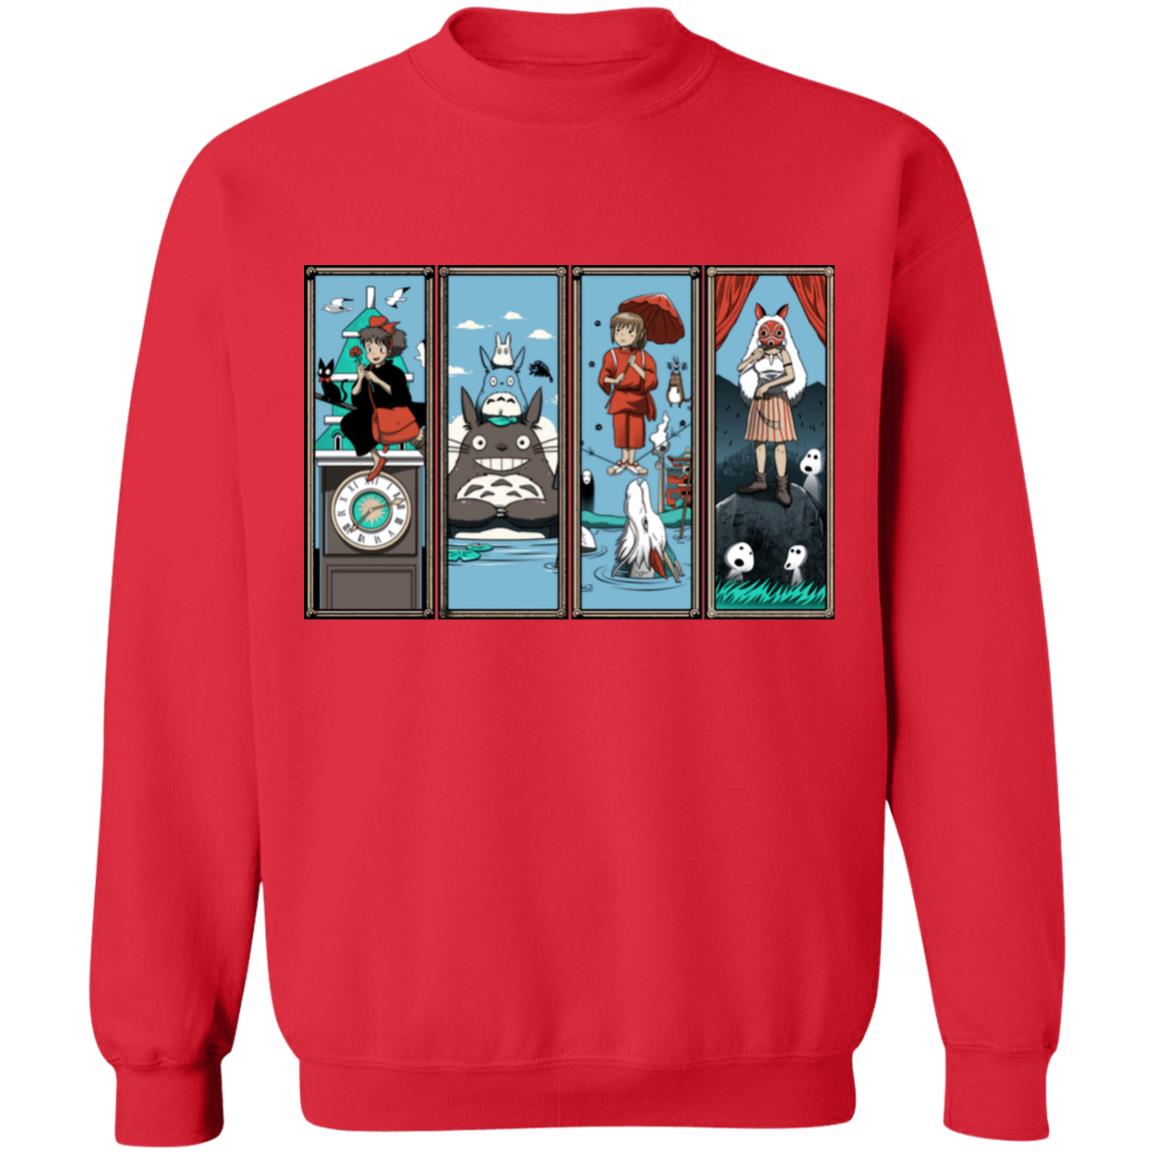 Ghibli Most Famous Movies Collection Sweatshirt